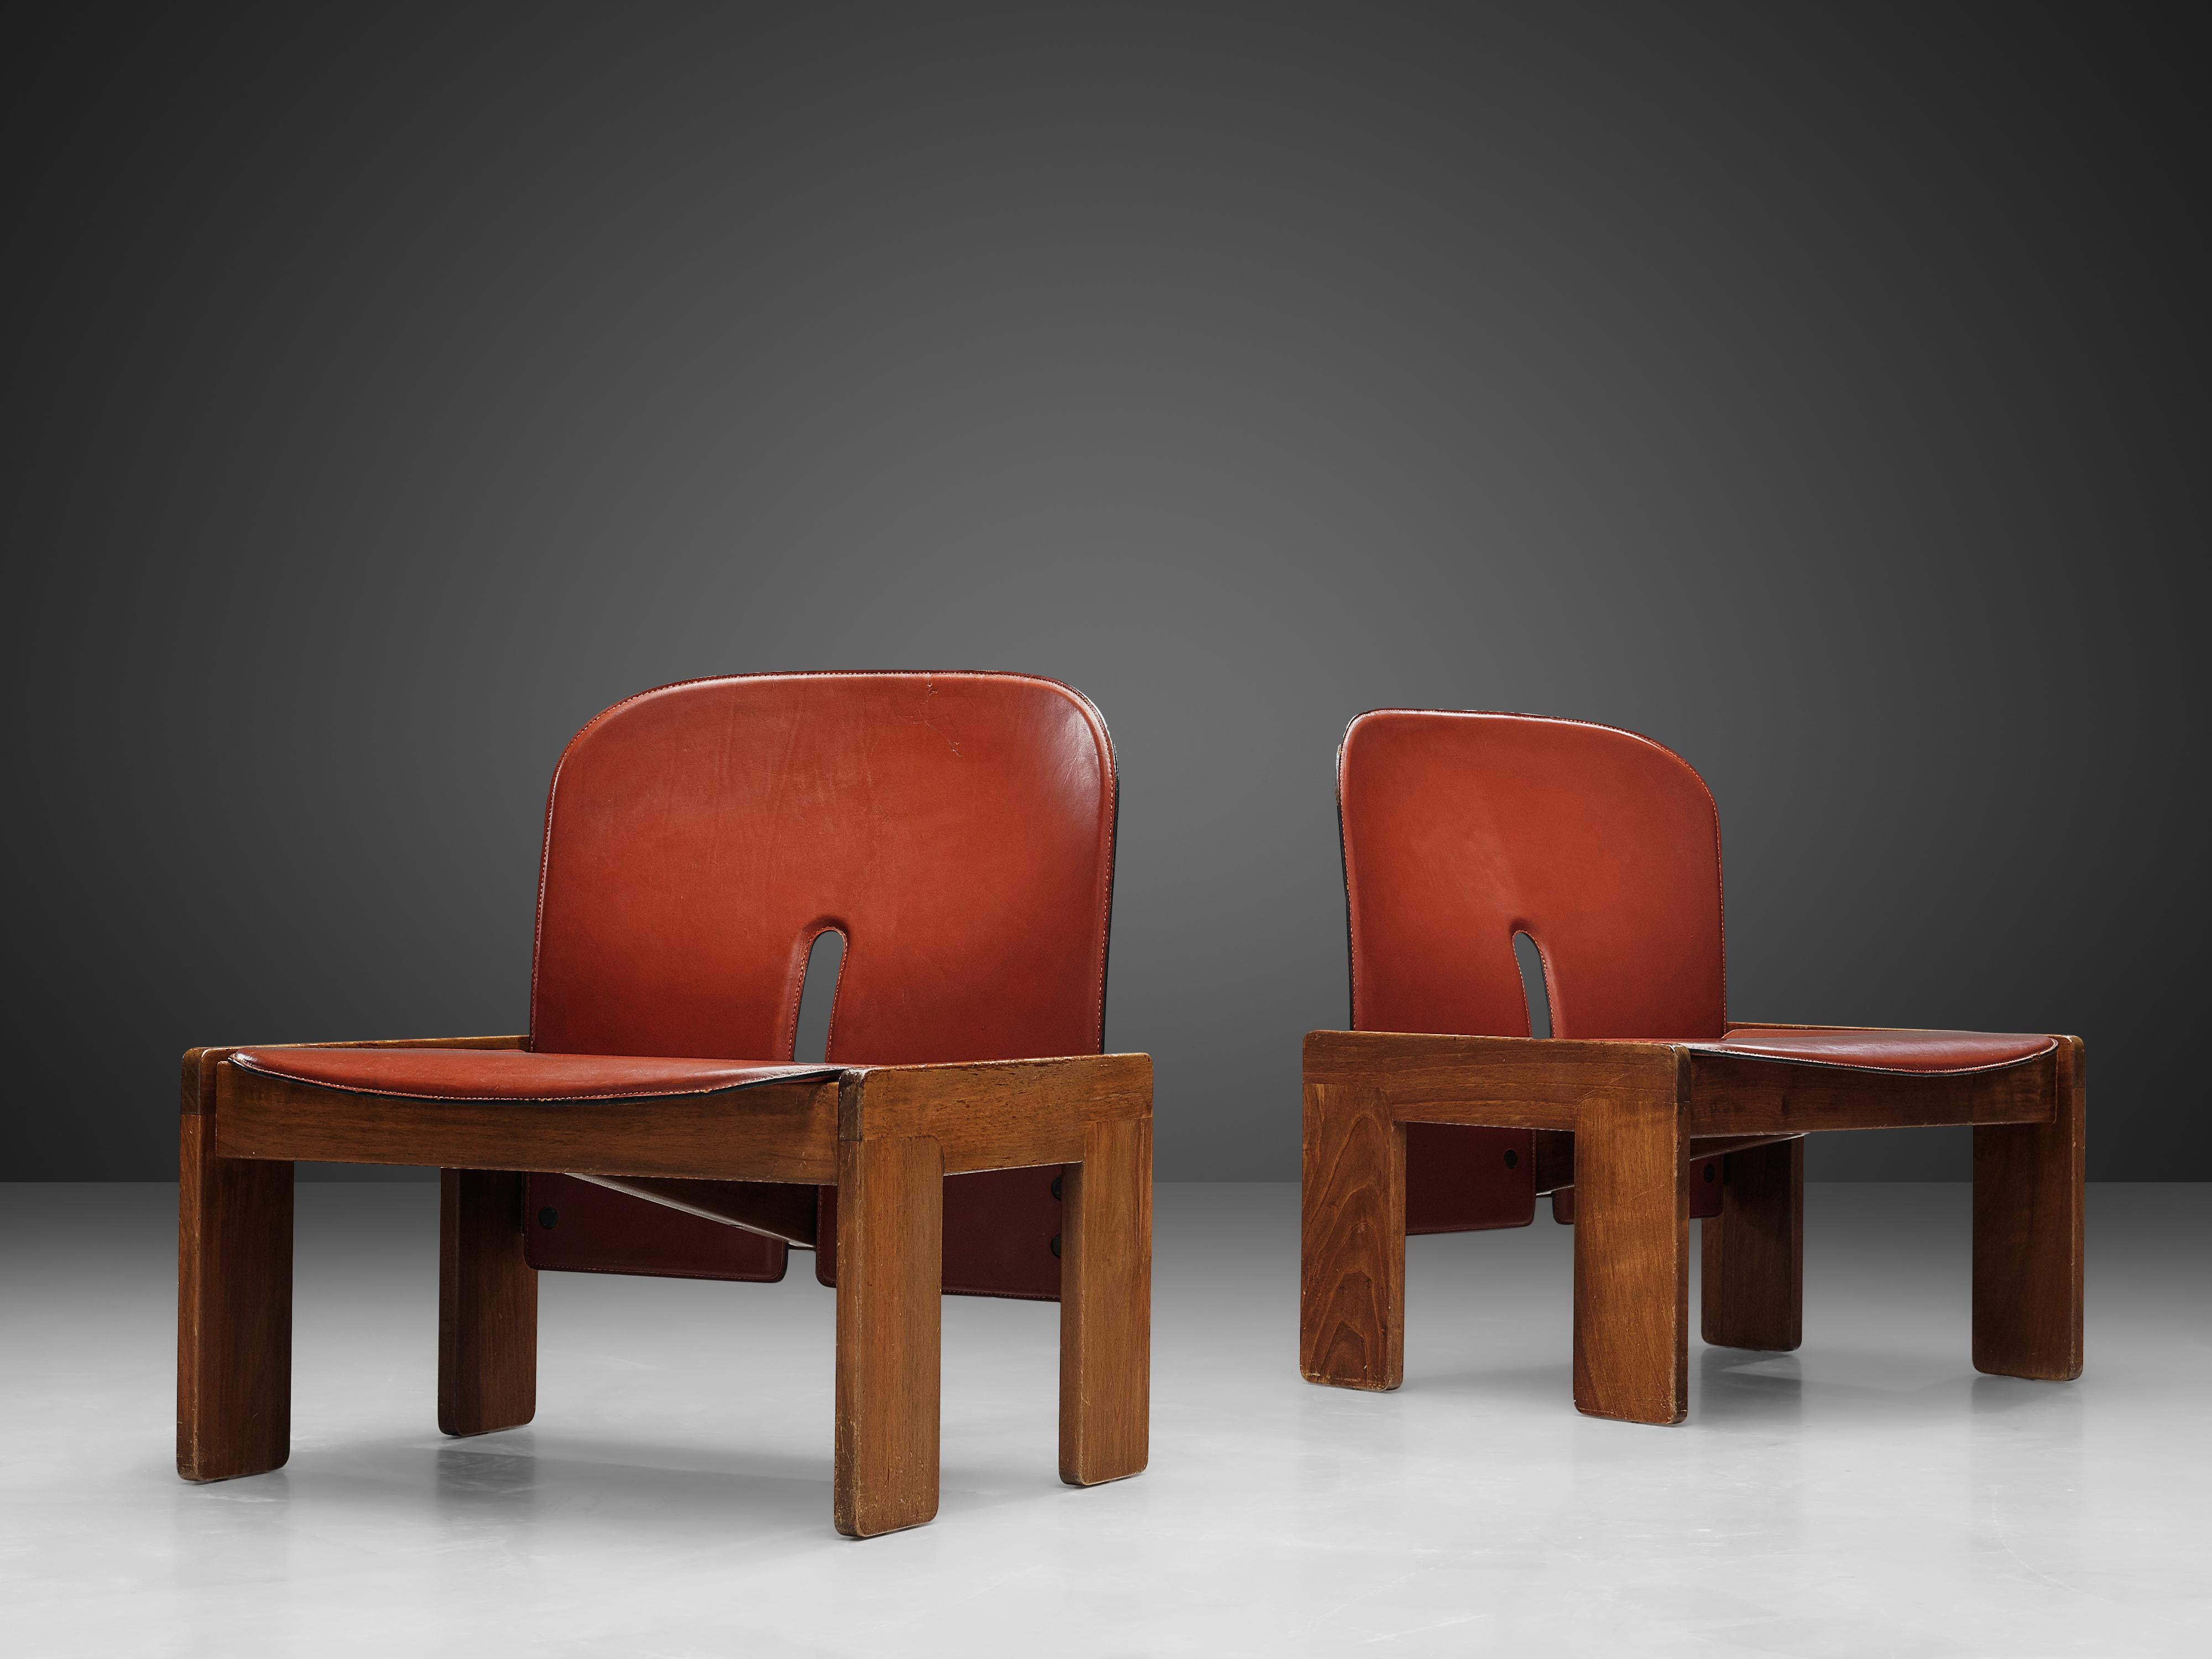 Italian Afra & Tobia Scarpa Pair of Lounge Chairs Model '925' in Walnut and Red Leather